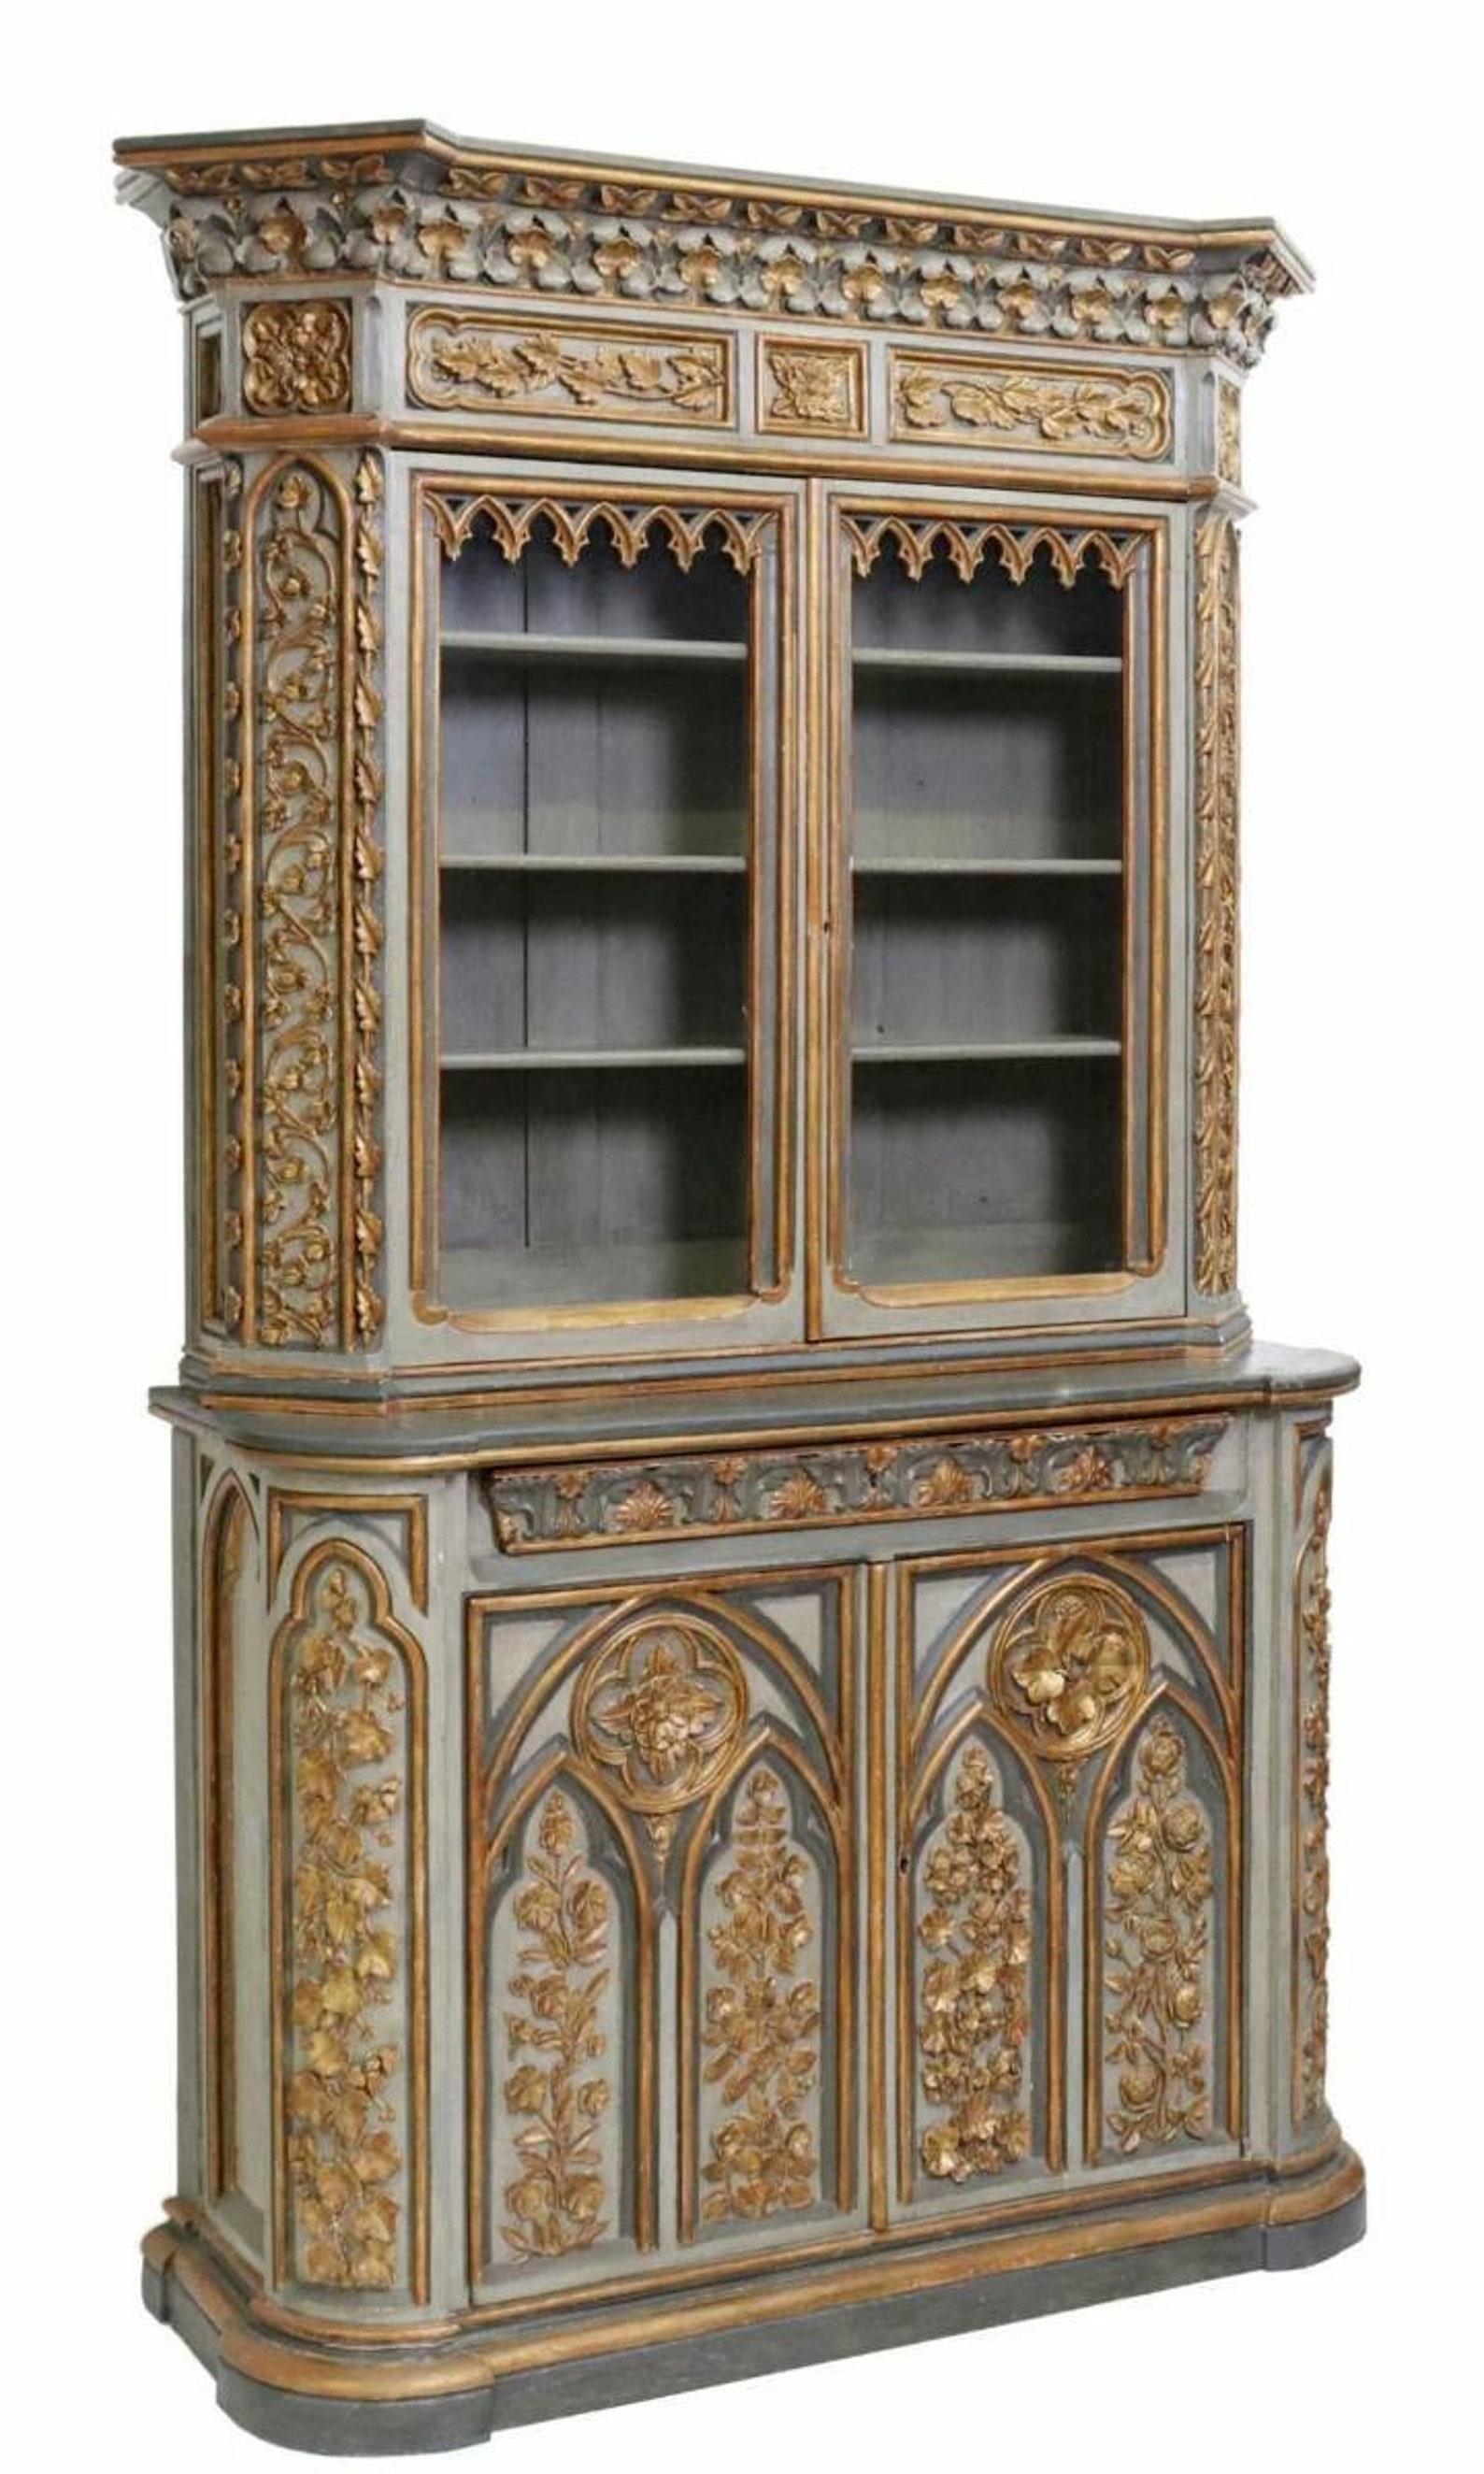 A magnificent 19th century Gothic Revival hand carved painted parcel gilt bibliothèque (bookcase - buffet - china cabinet). 

Born in France, circa 1840, most impressive size, two-piece, high quality solid wood construction, ornate Neo-Gothic